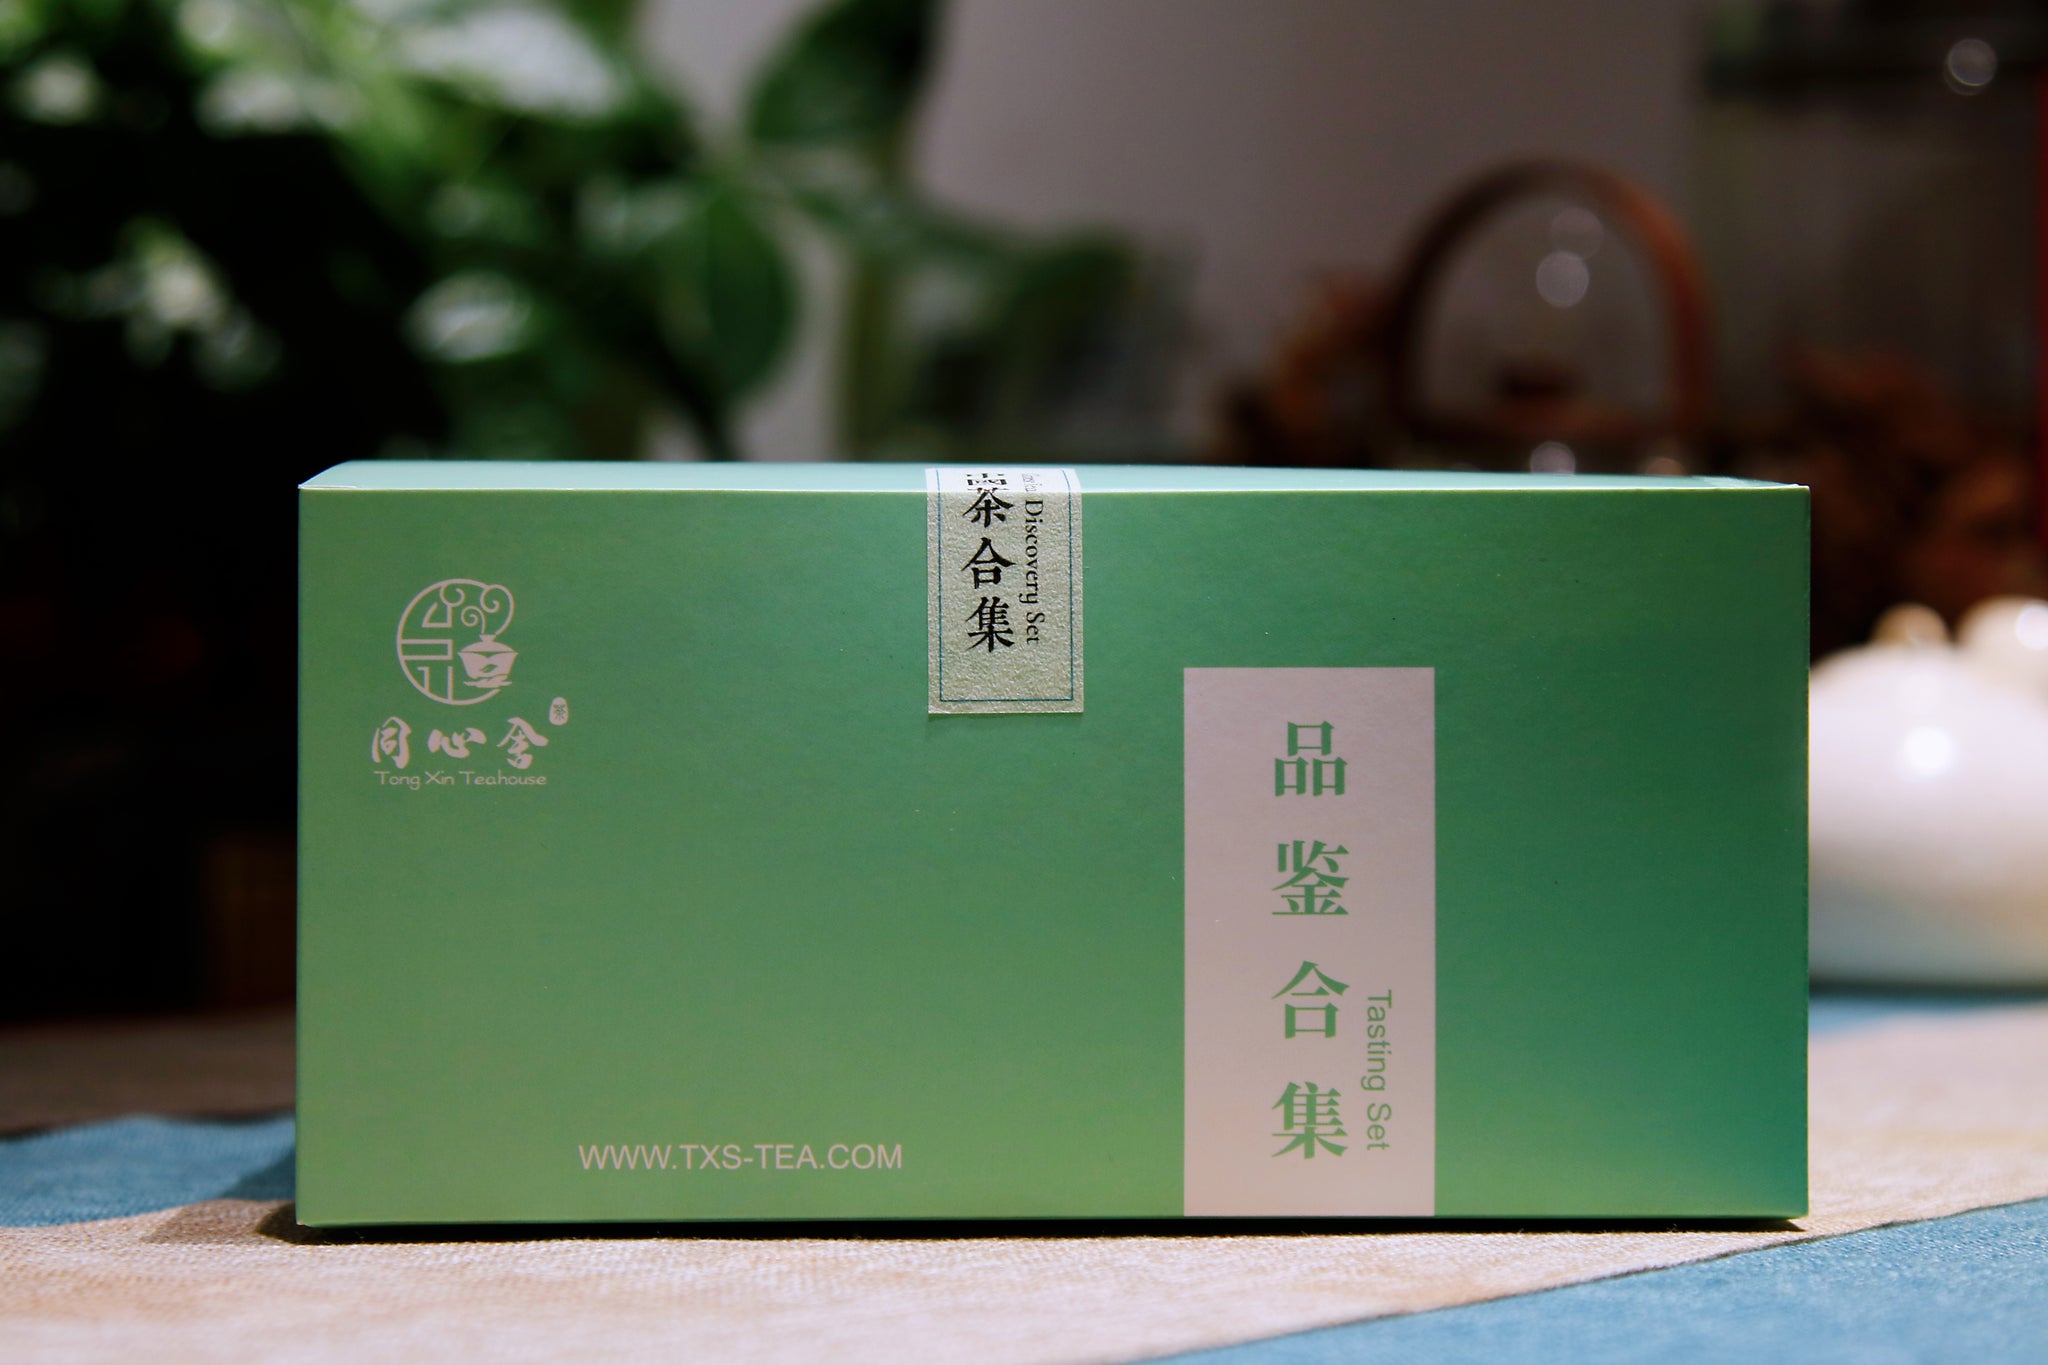 Chinese Tea Discovery Set – Tong Xin She